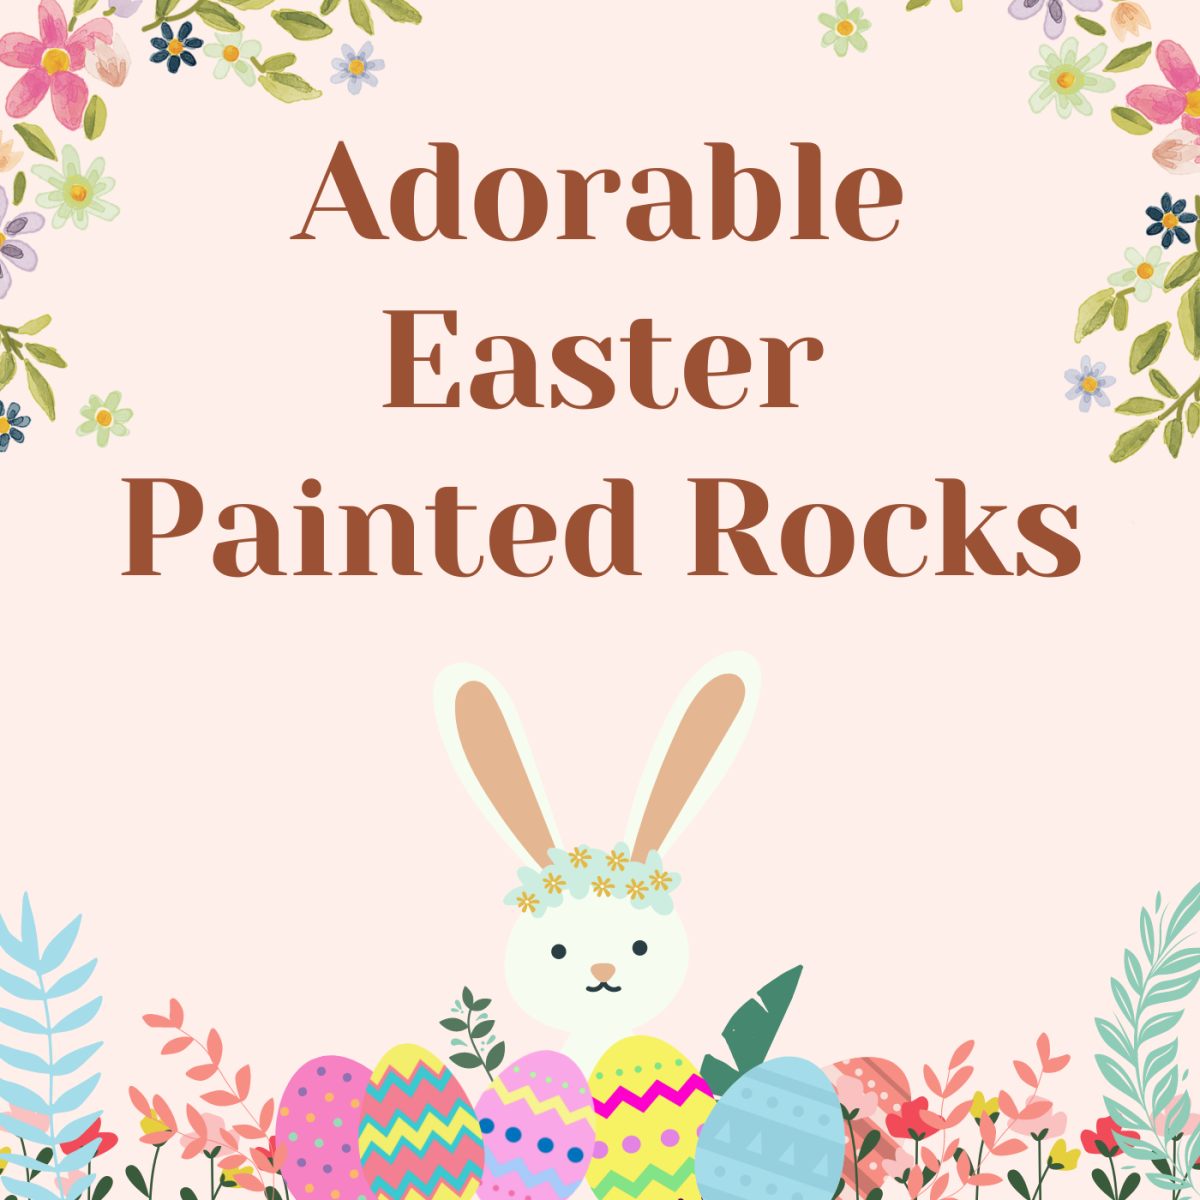 50+ Easter Painted Rocks That Are Egg-Cellently Fun to Paint